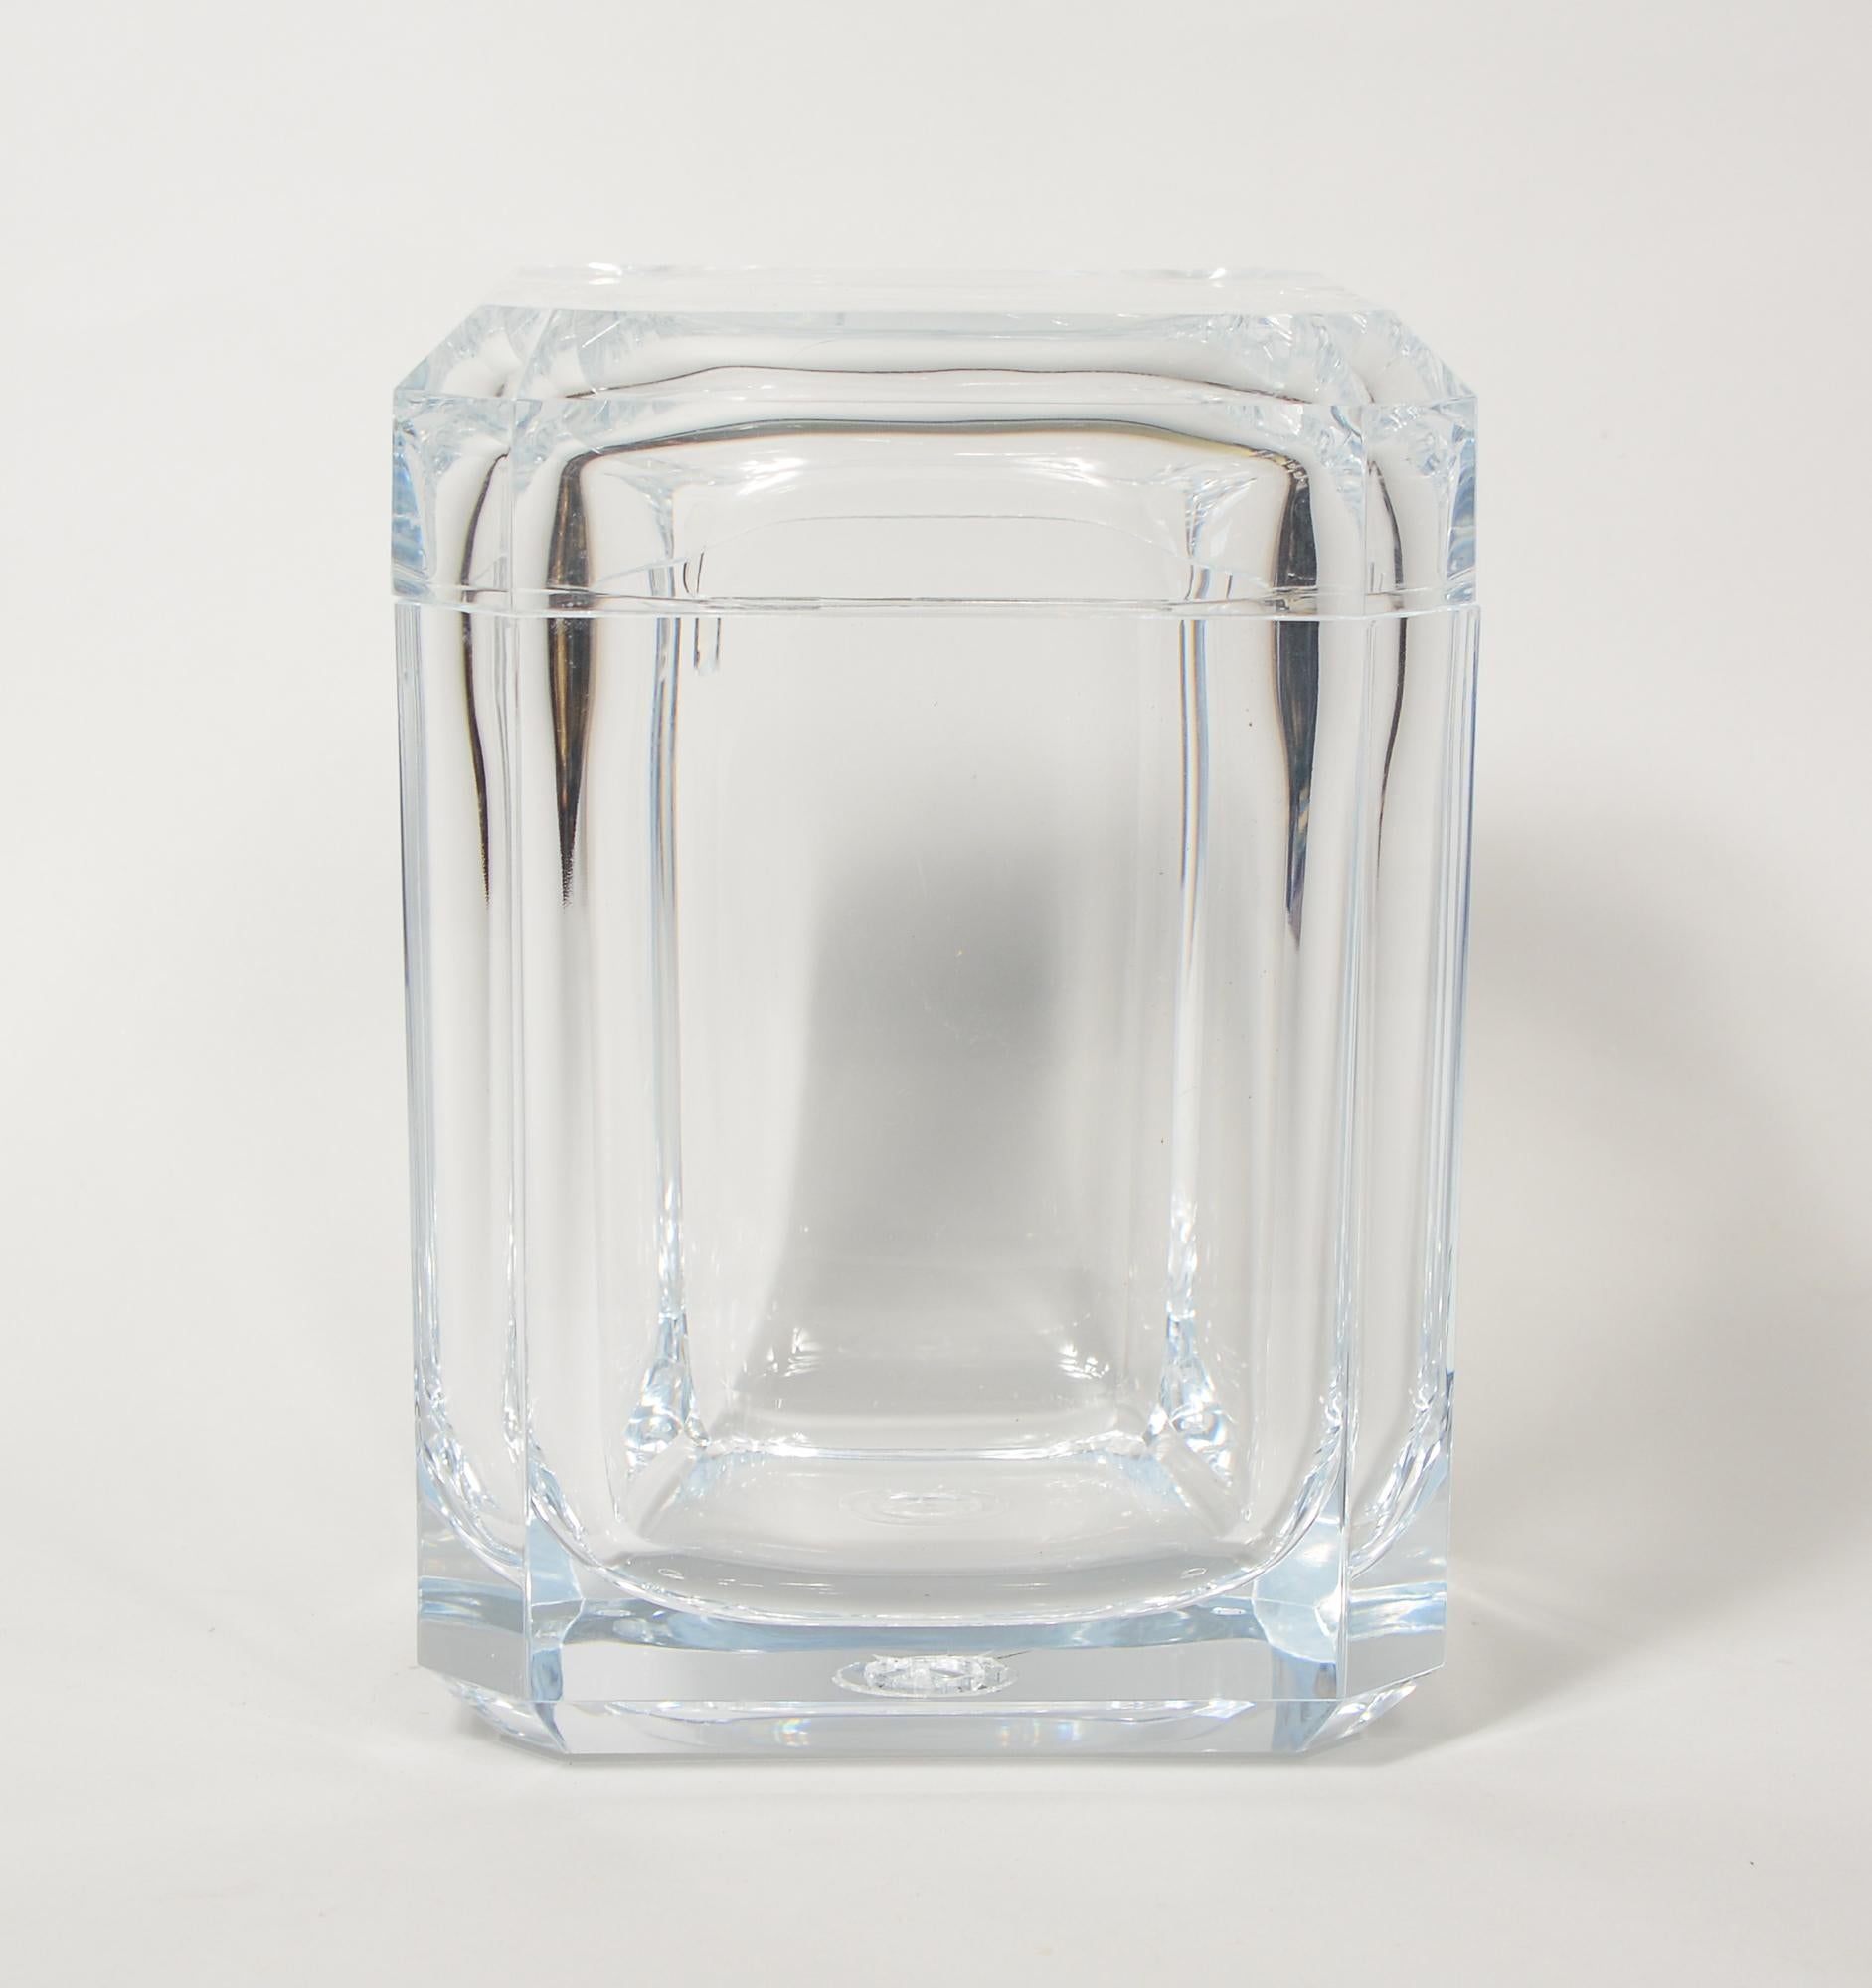 Carlisle acrylic ice bucket by Grainware. This ice bucket has a pivoting top to access the ice. There is some checking in the acrylic in the top and on the bottom center. There may be some small light scratches. 